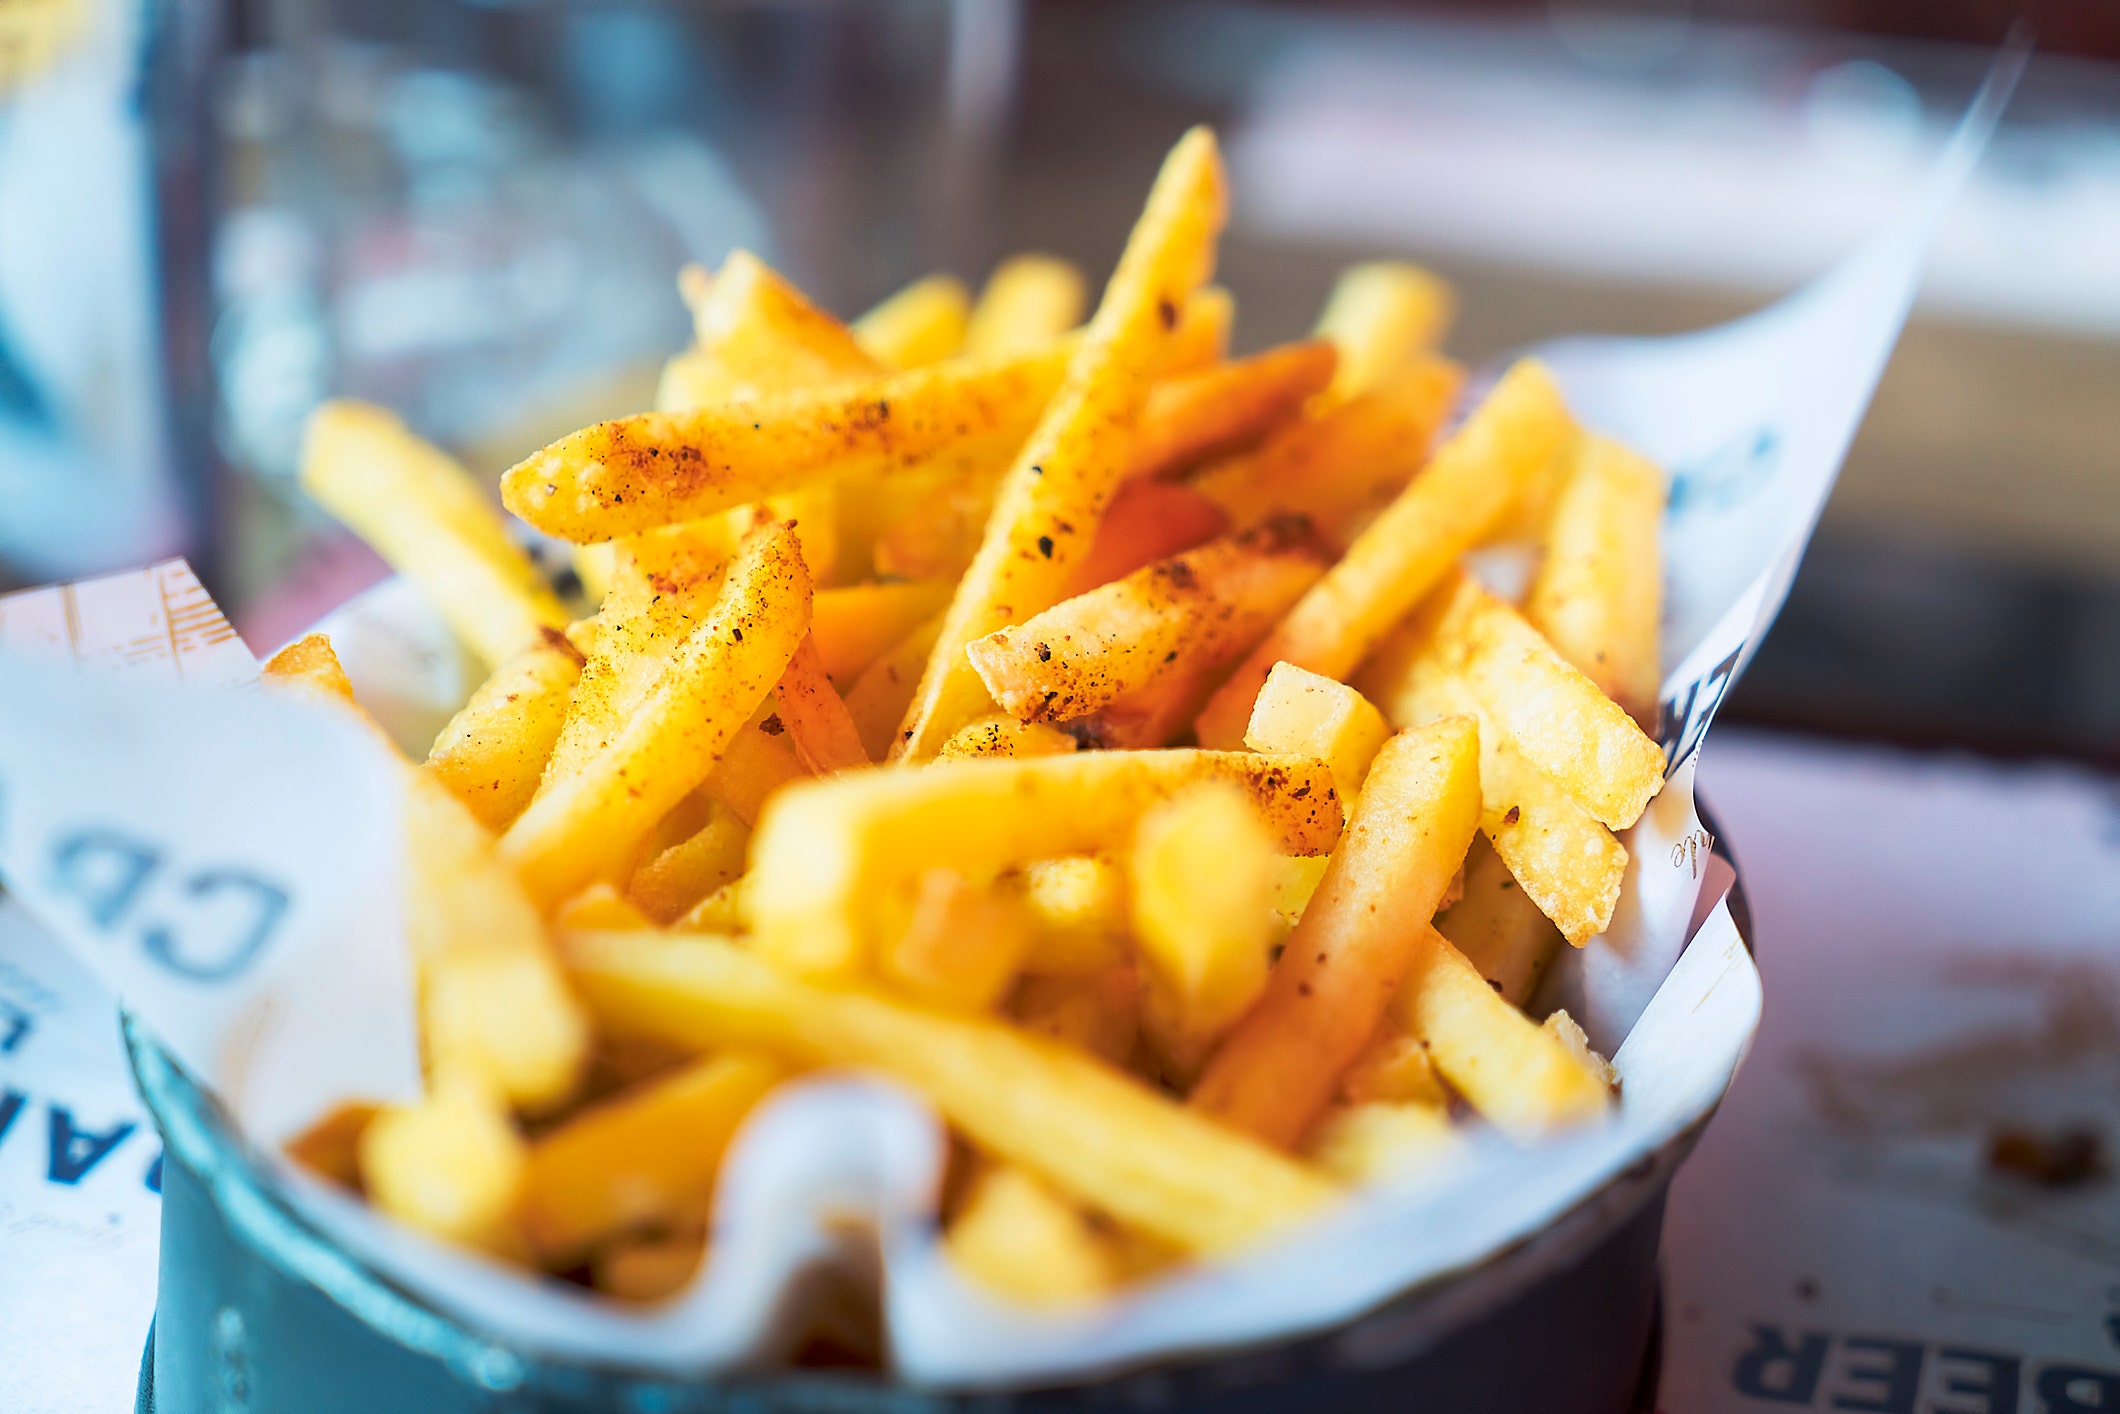 National French Fry Day 2022: Fun facts on the crispy food that became an American staple